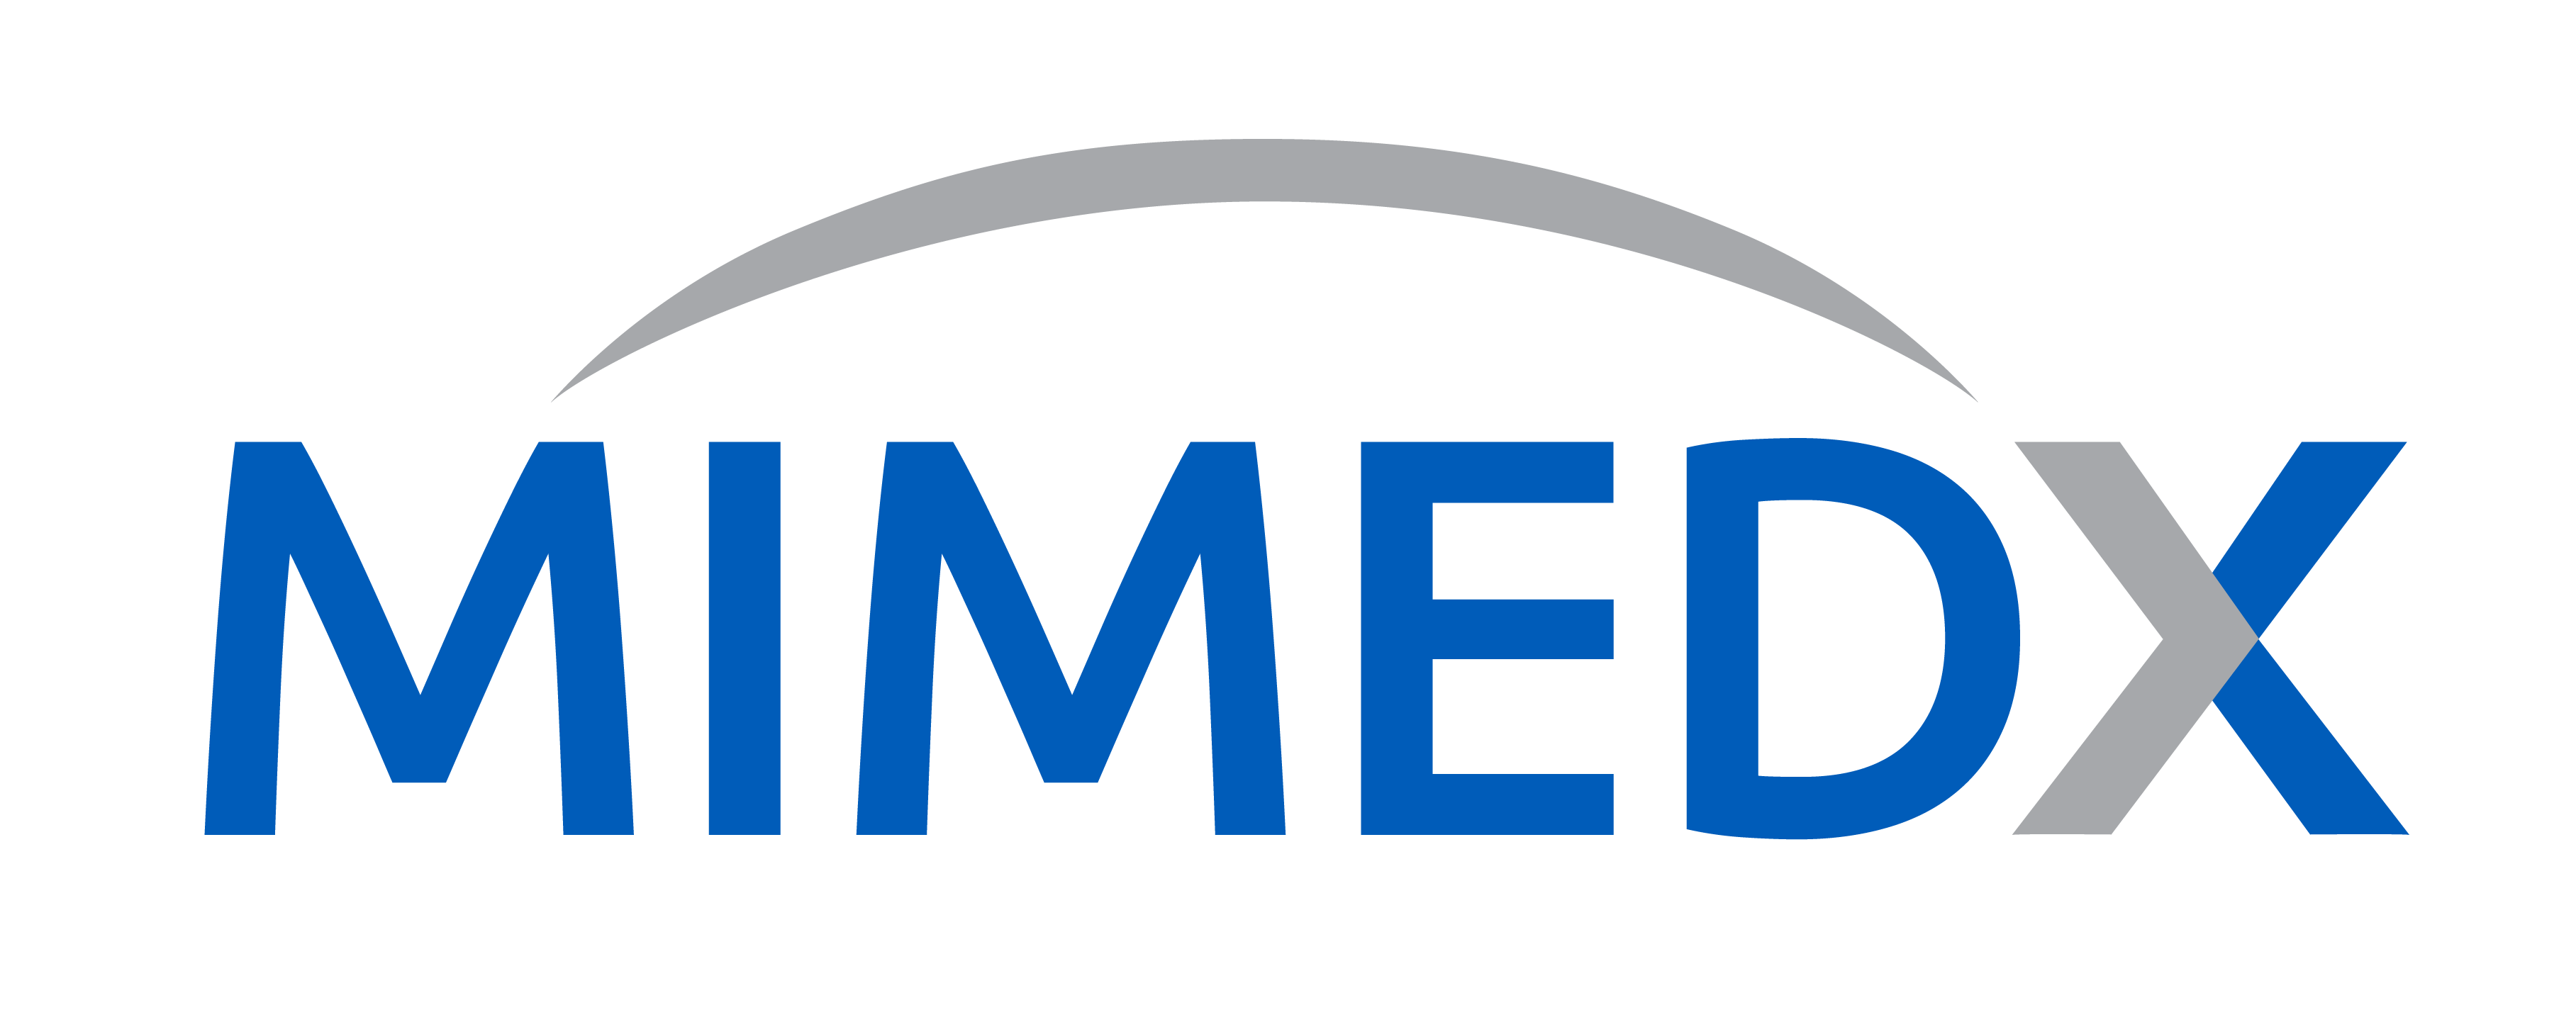 MIMEDX Announces the Appointment of Kim Moller to Chief Commercial Officer